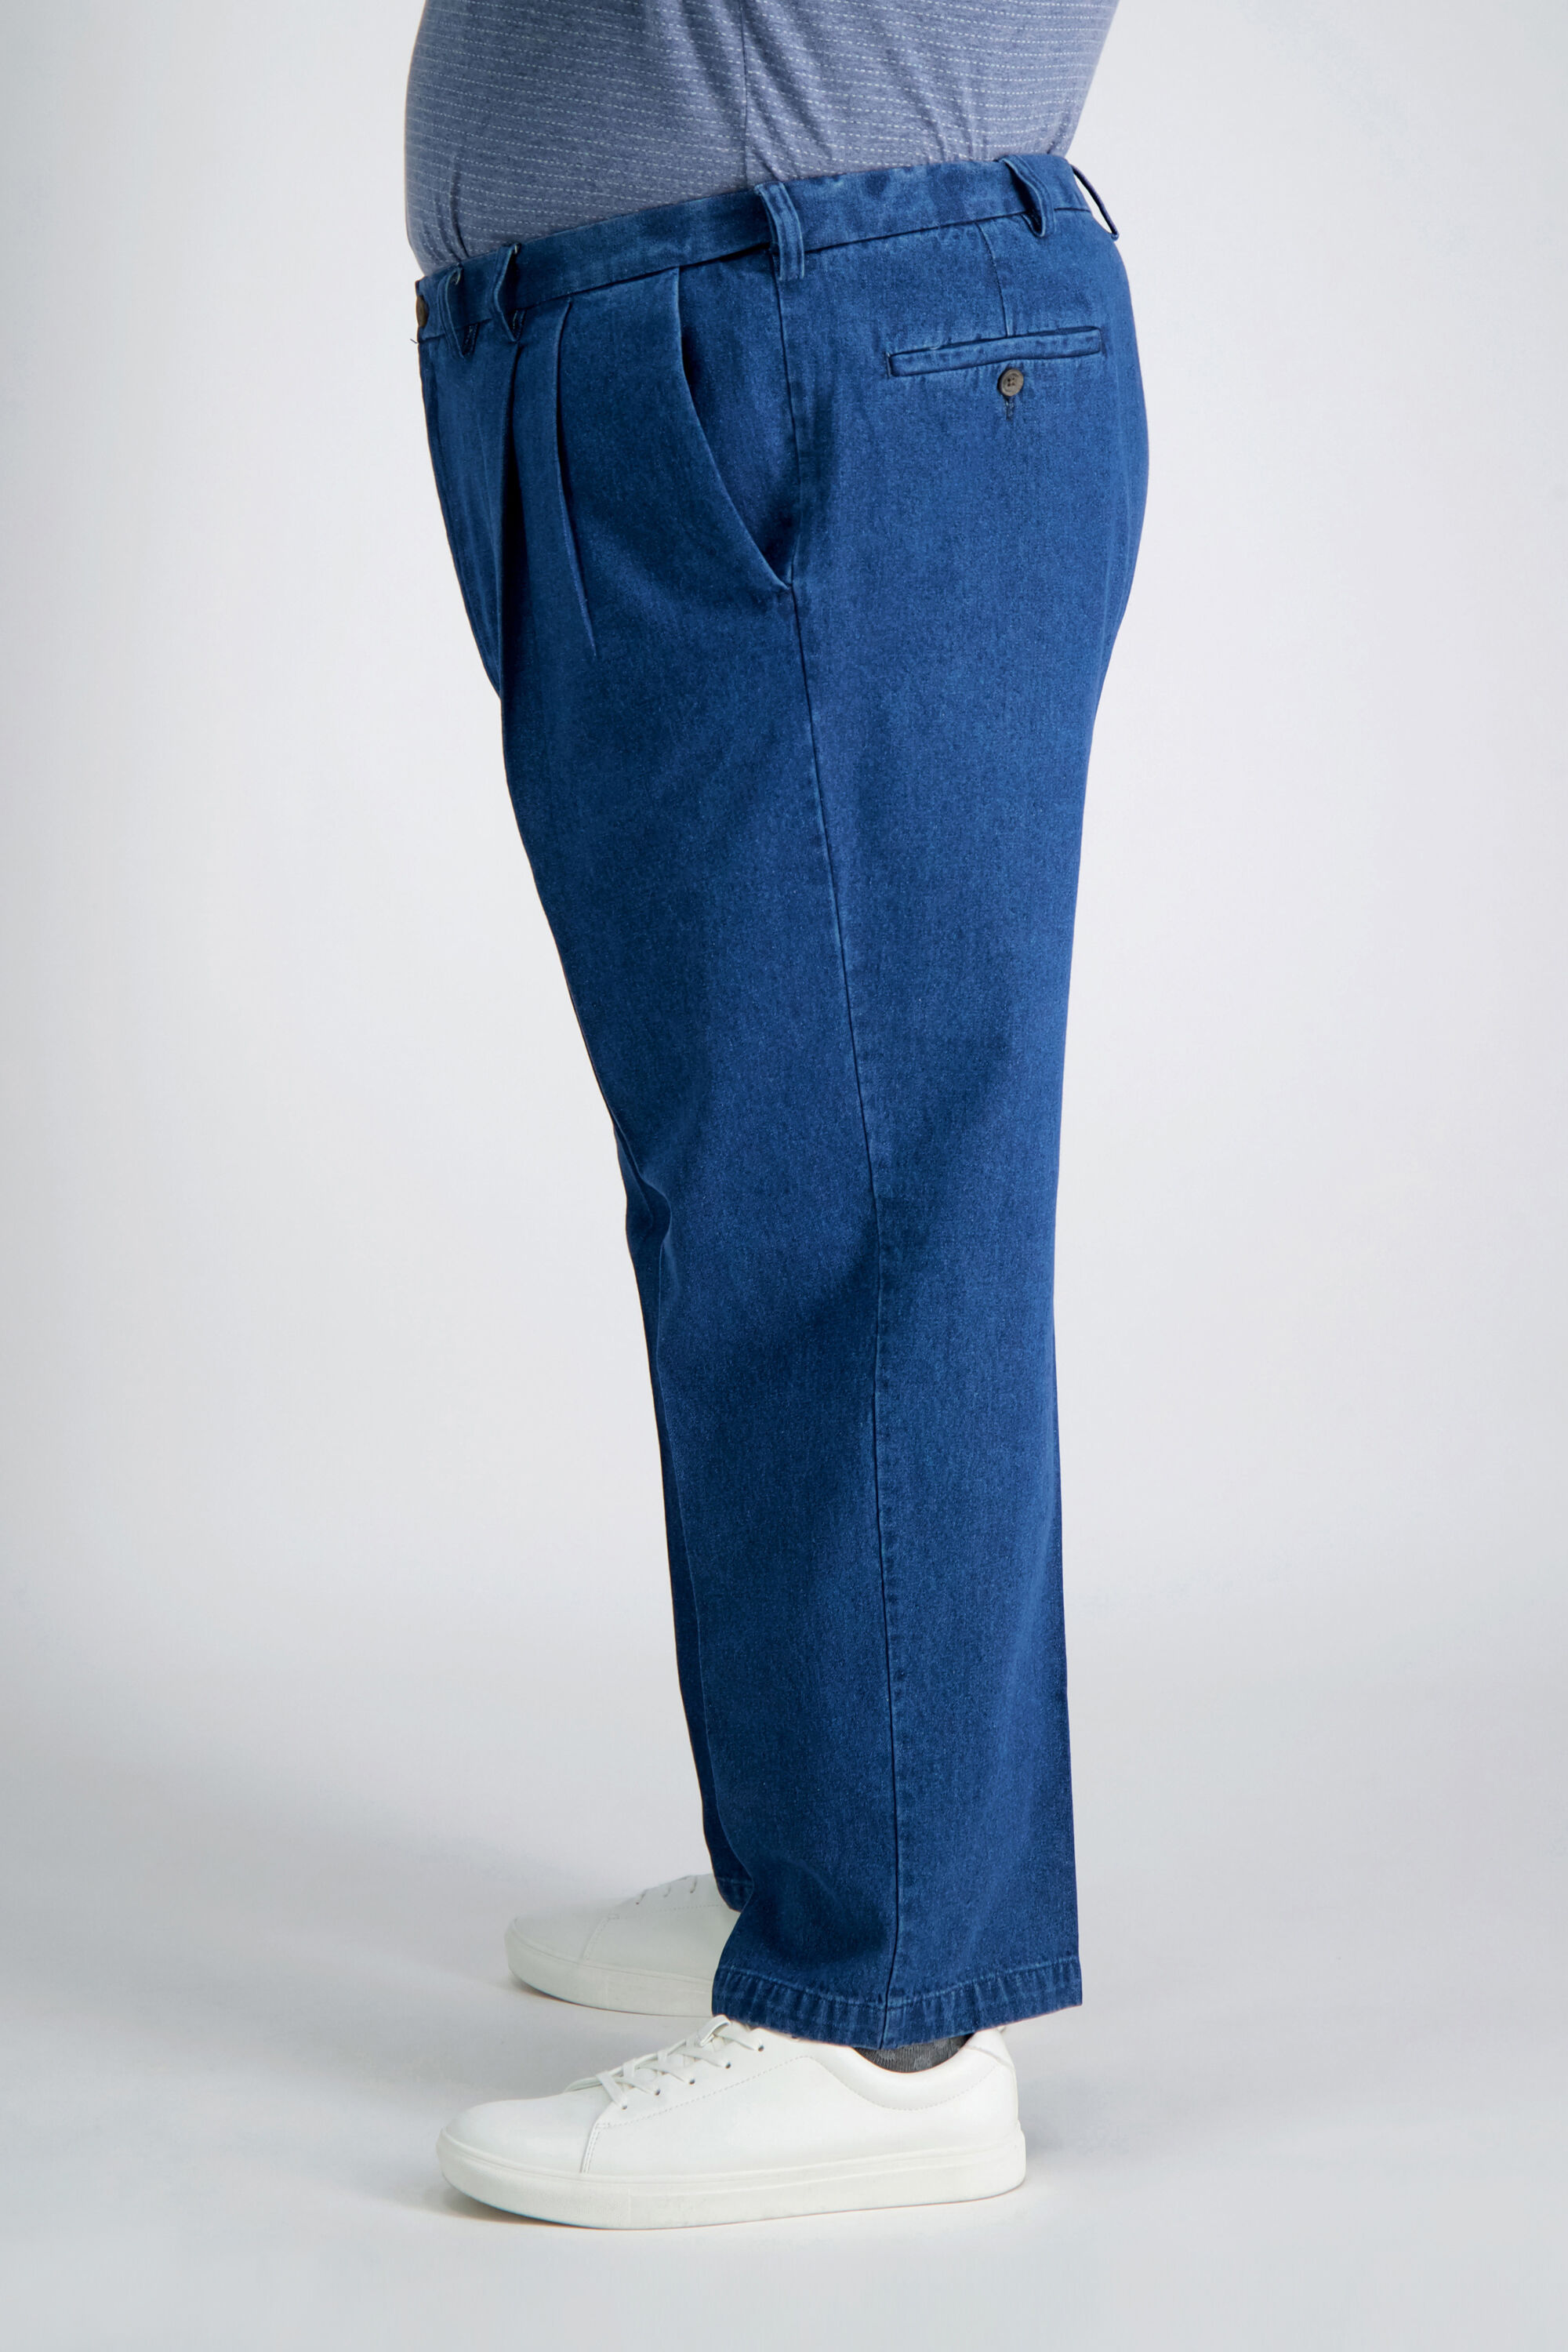 Big & Tall Work to Weekend Denim | Classic Fit, Pleated, No Iron ...